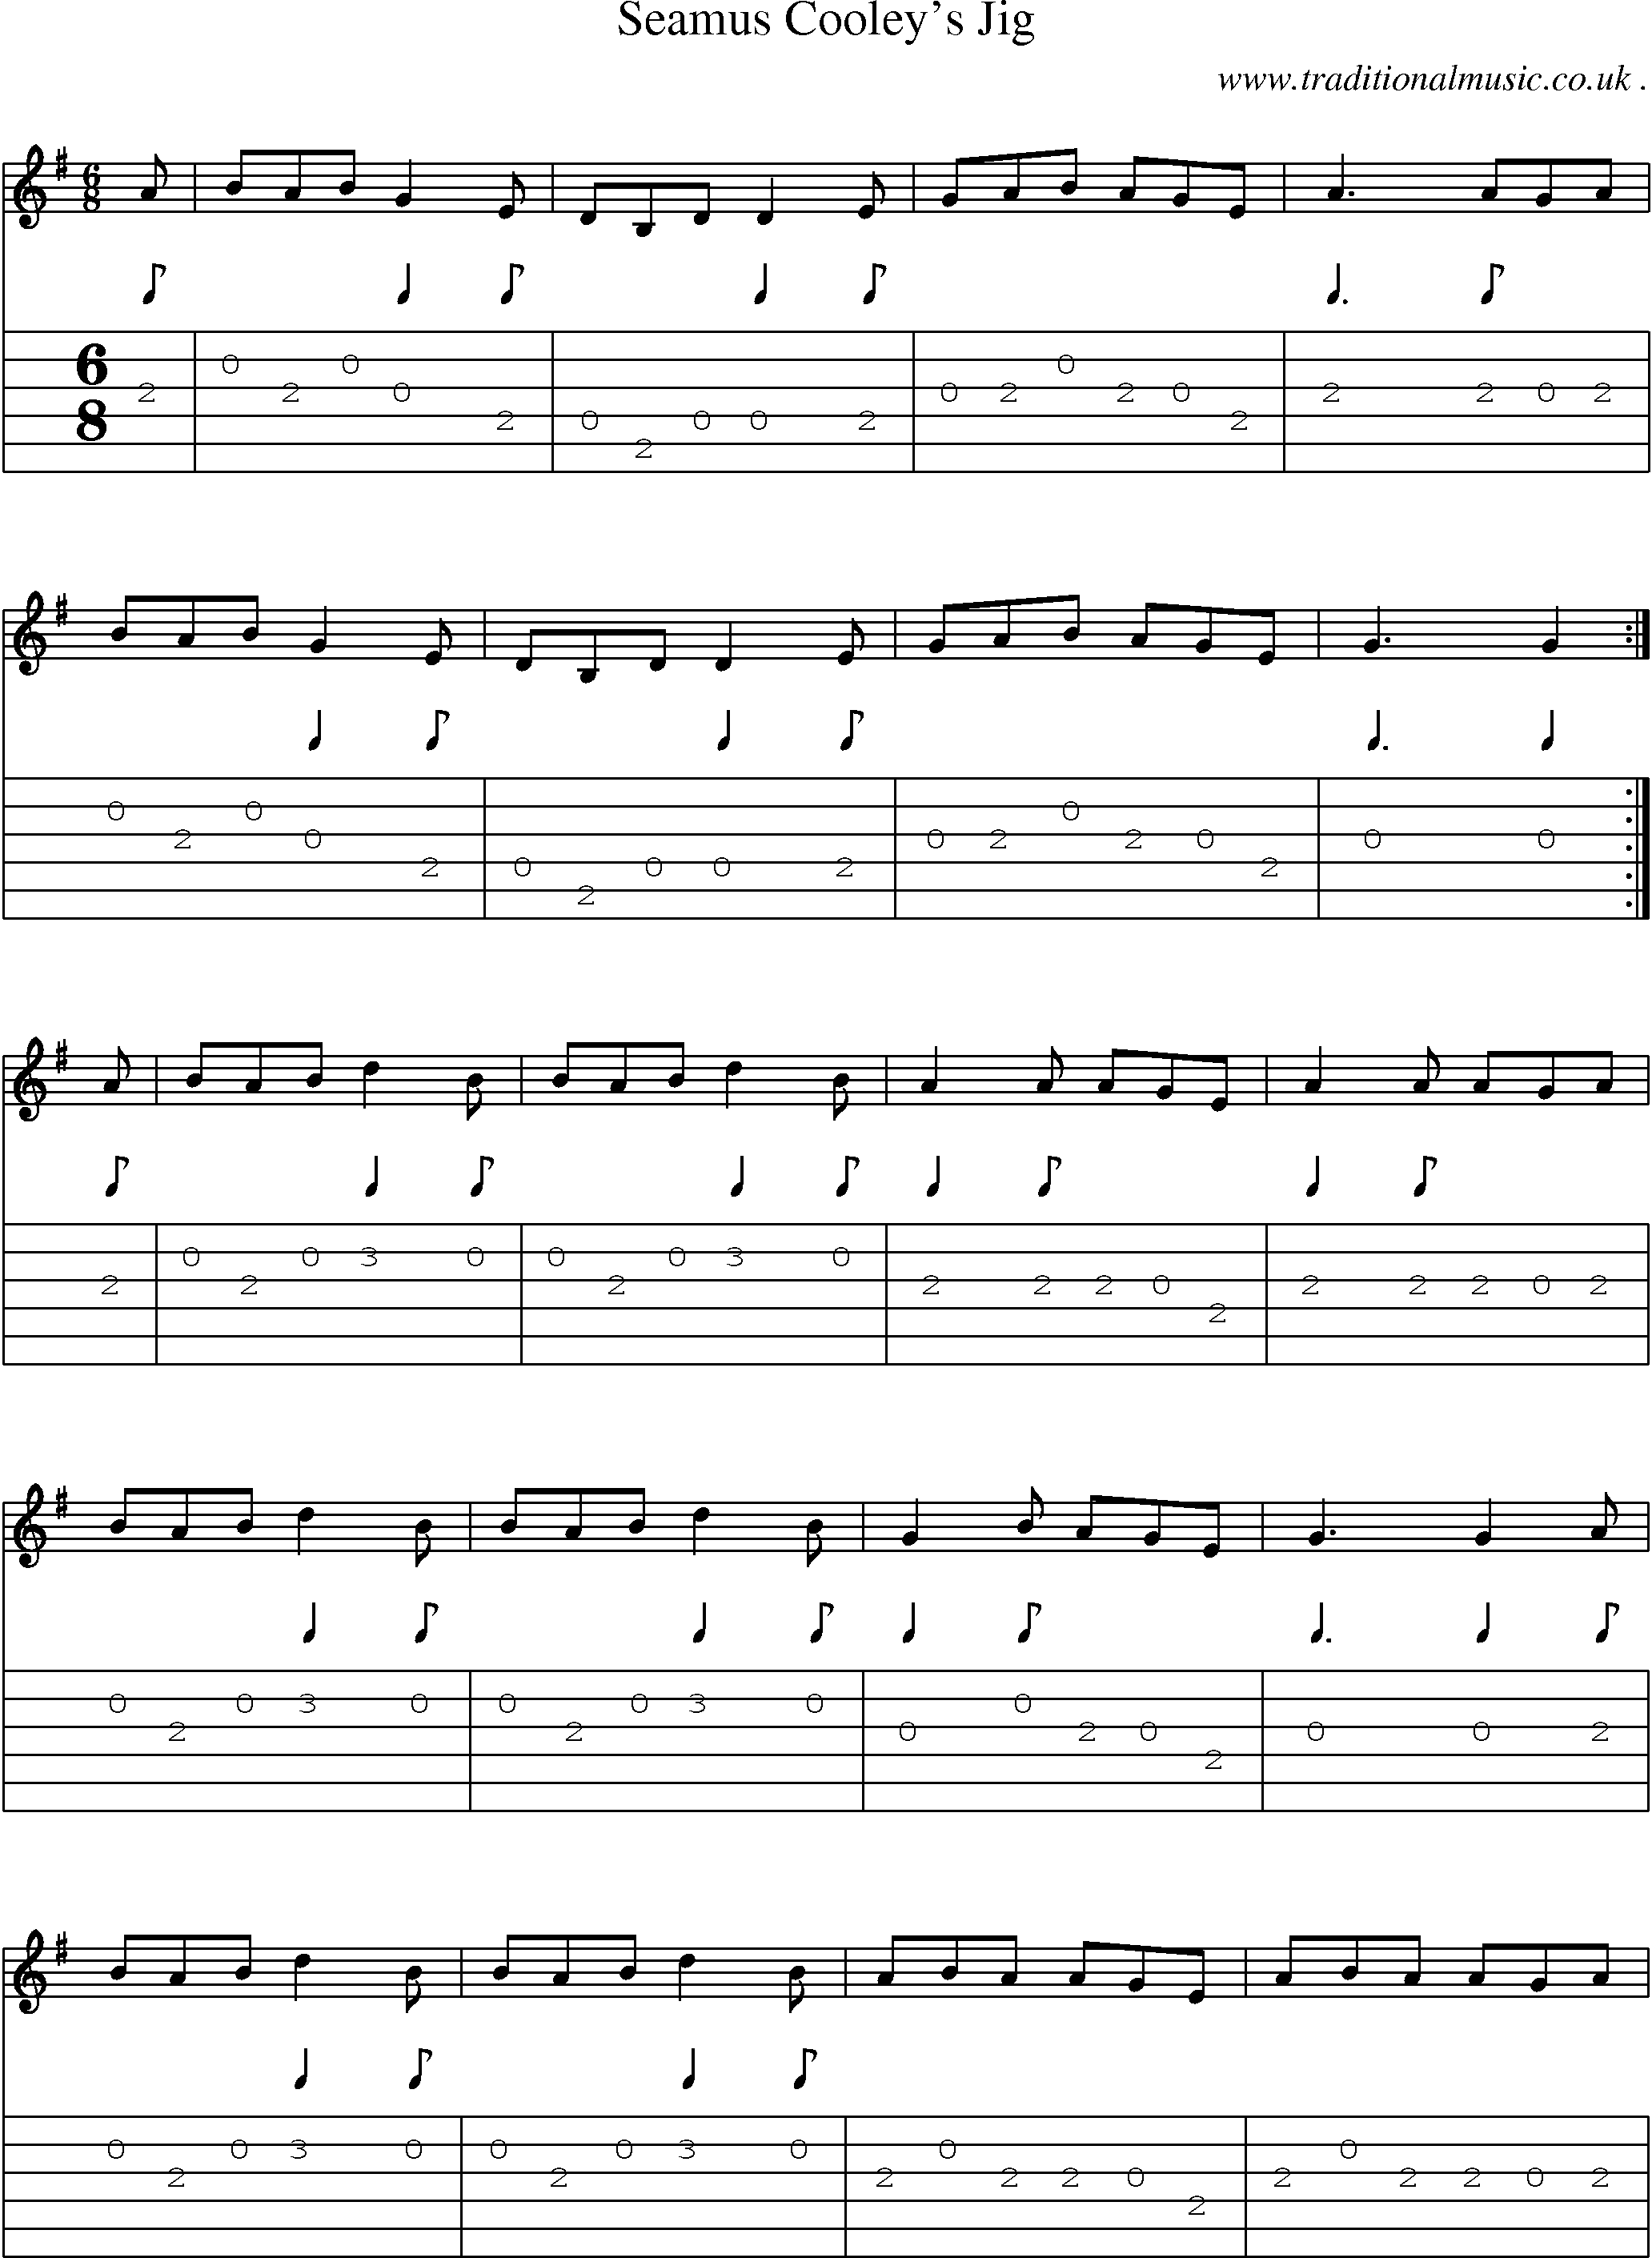 Sheet-Music and Guitar Tabs for Seamus Cooleys Jig